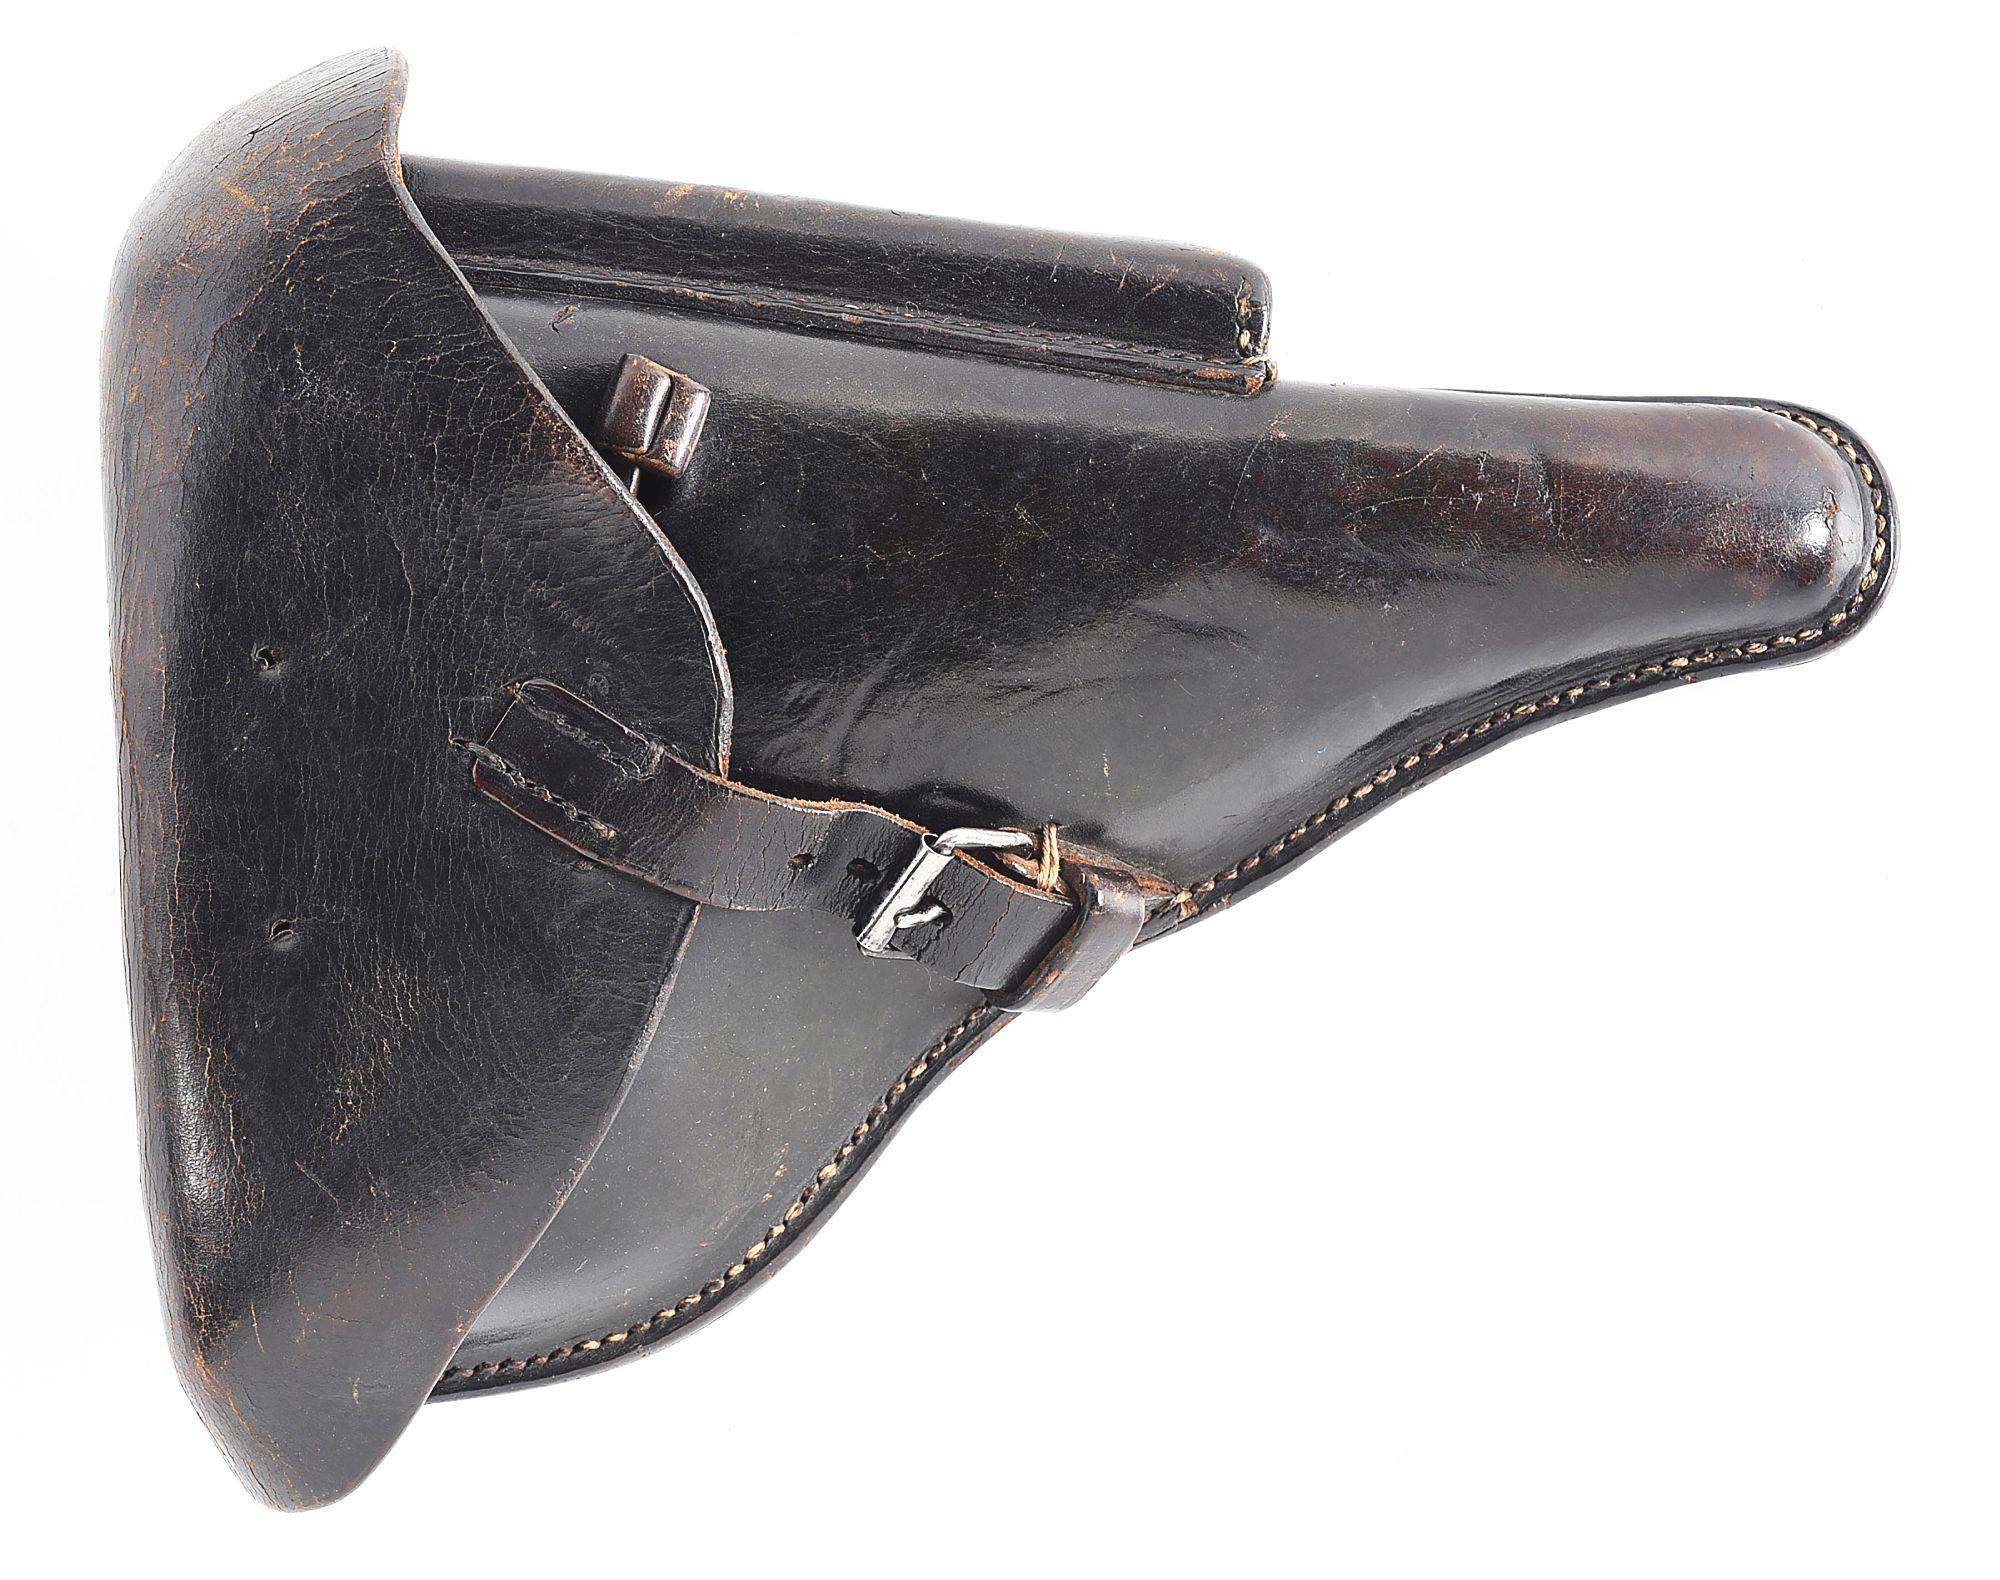 (C) 1938 MAUSER PO8 LUGER SEMI-AUTOMATIC PISTOL, WITH MATCHING LEATHER HOLSTER.